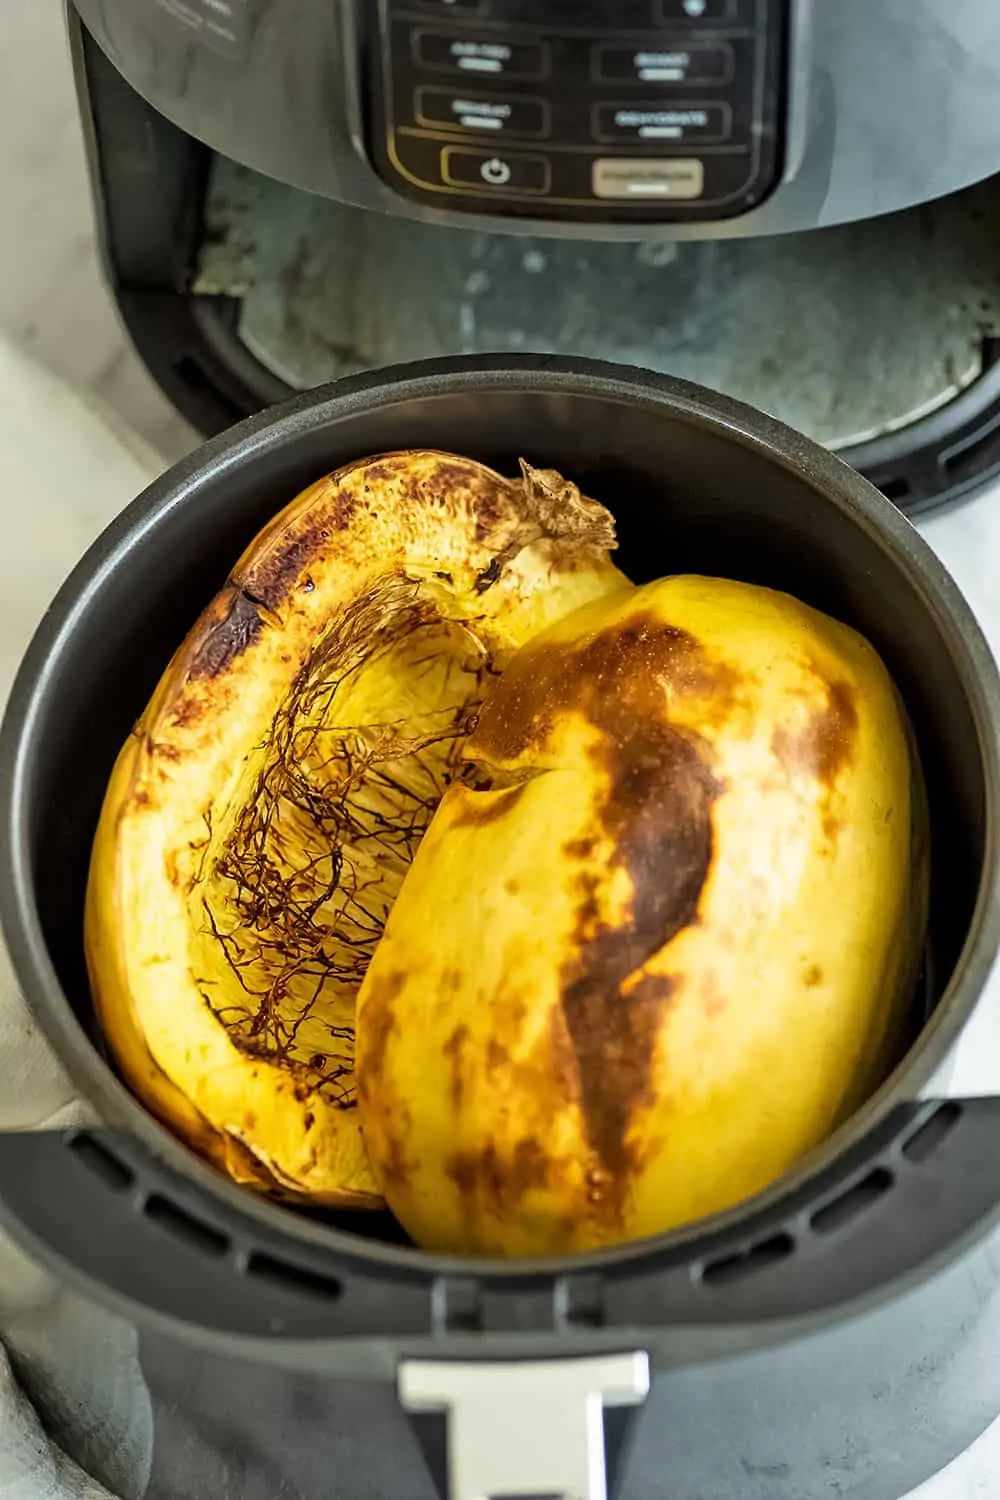 Spaghetti squash in air fryer basket after cooking.